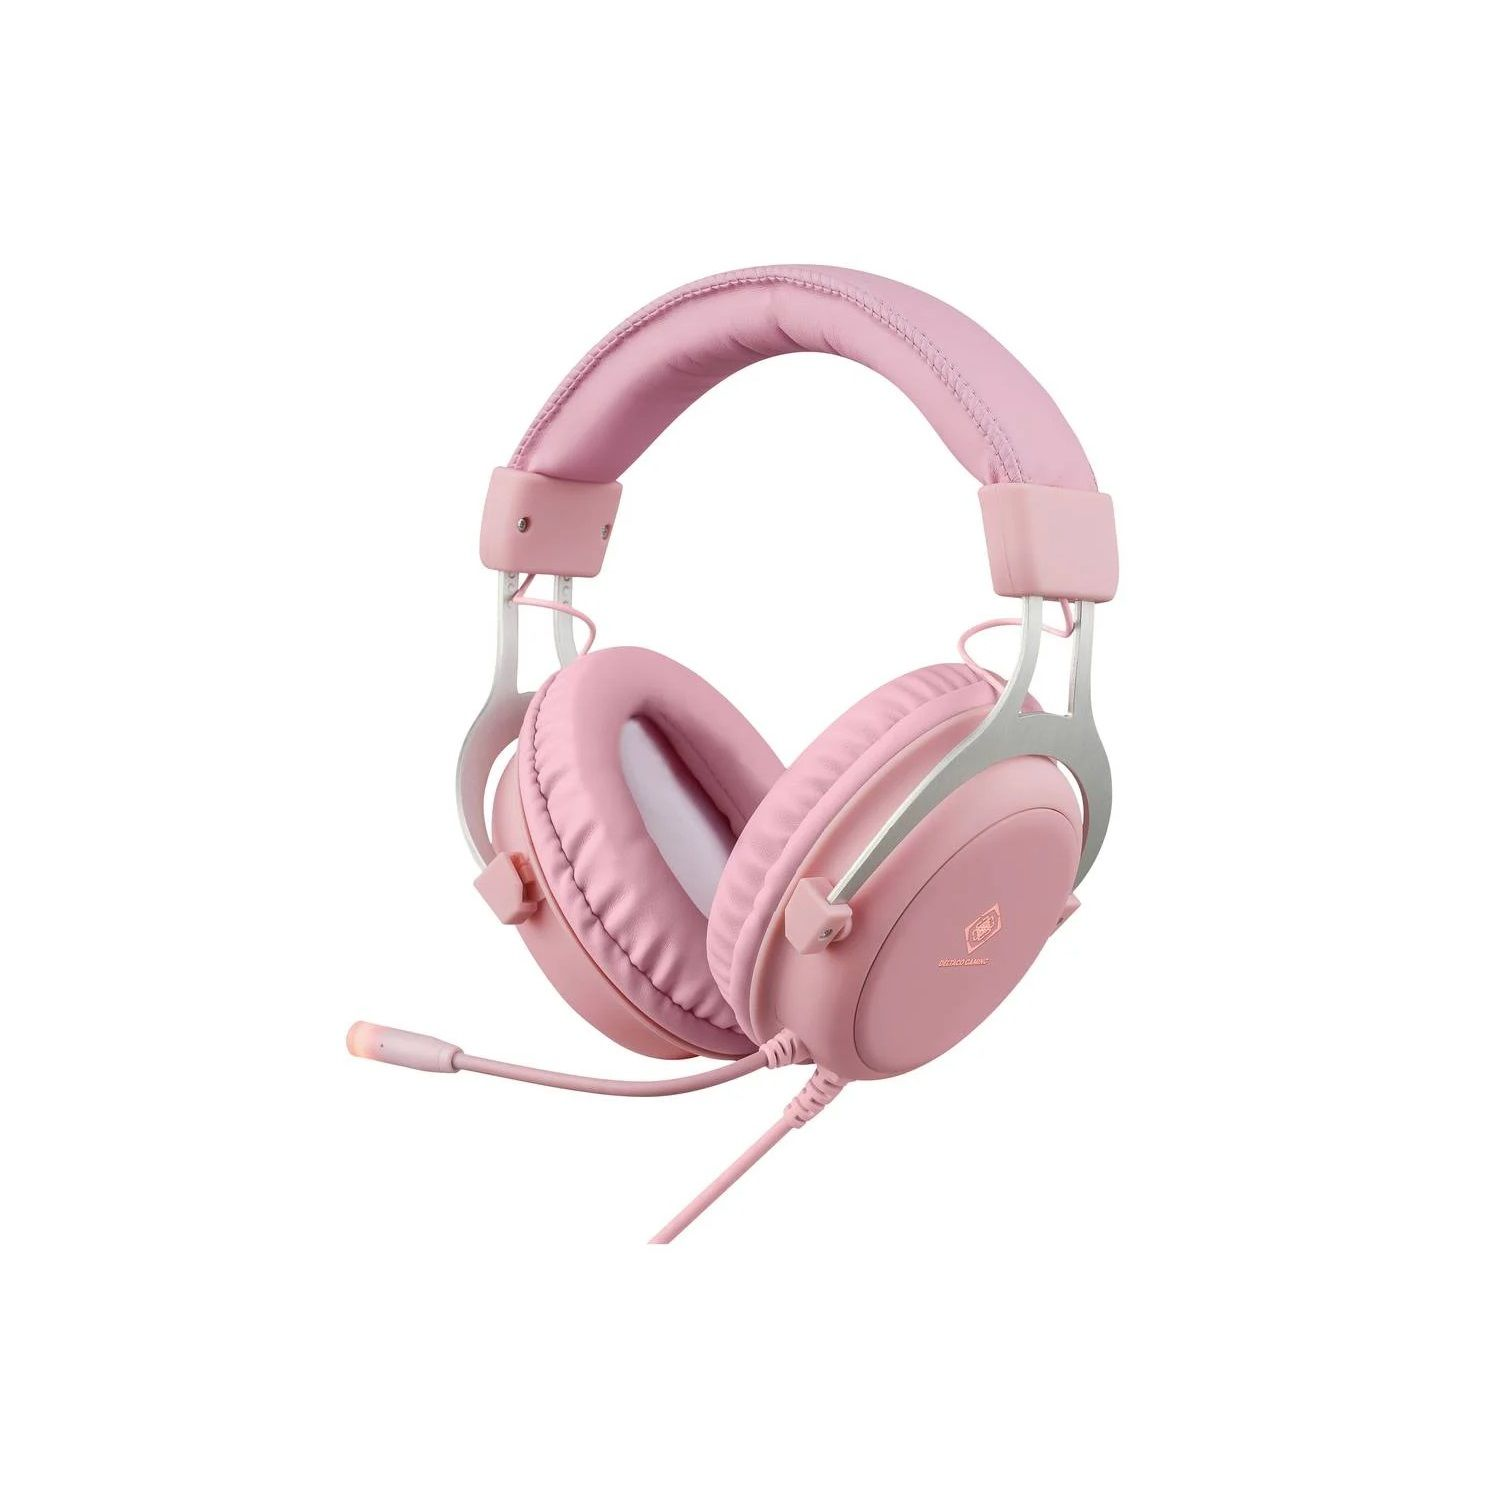 Headset Headset mit pink DELTACO Over-ear LED-Beleuchtung, Gamer GAMING